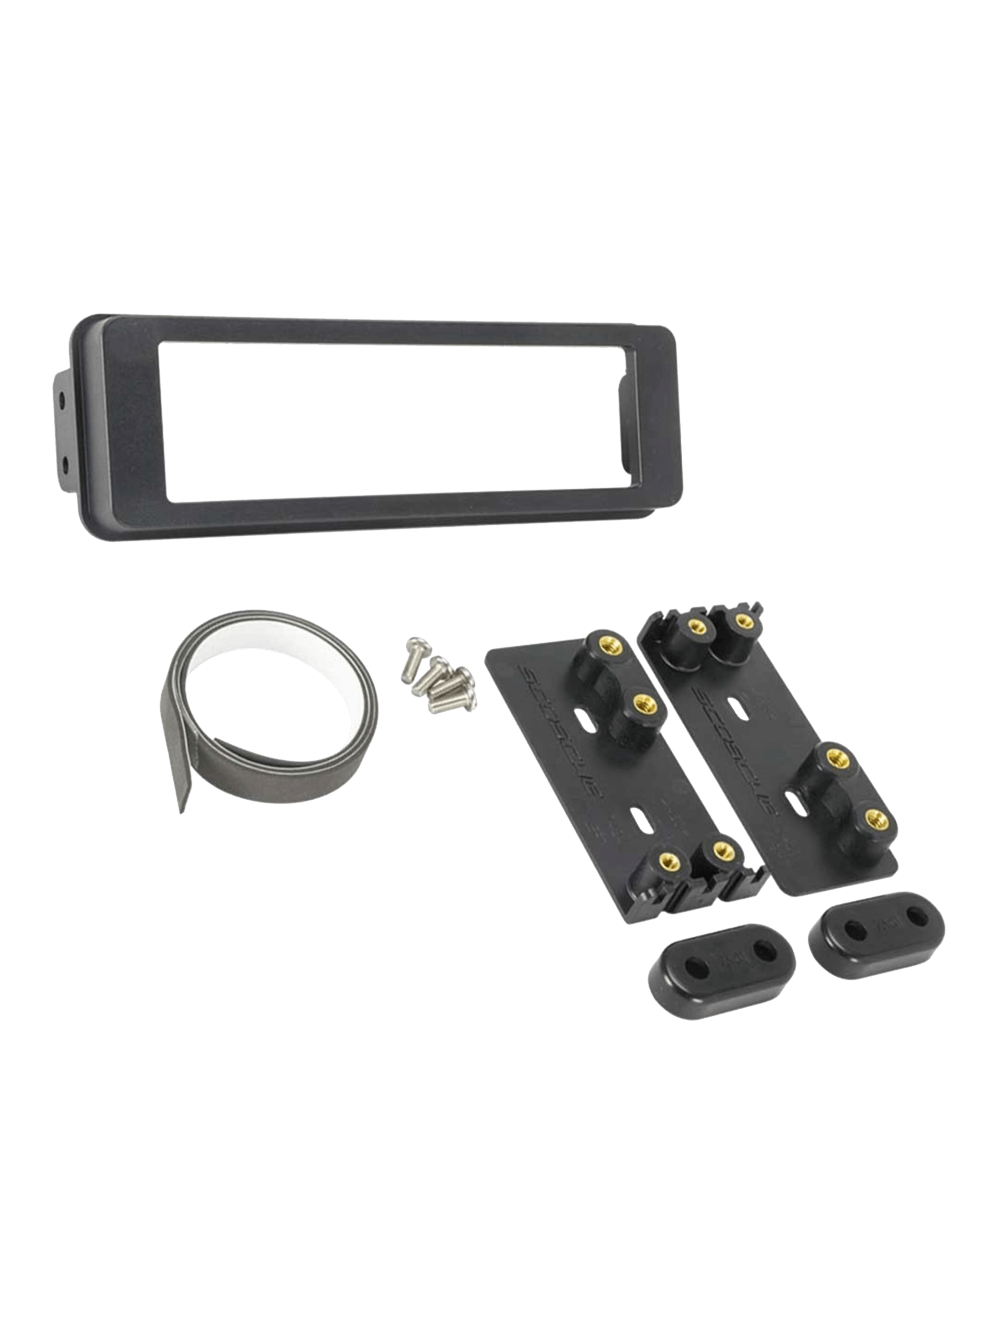 Scosche HD7000AB 1996-Up Select Harley Touring Single DIN Installation Dash Kit